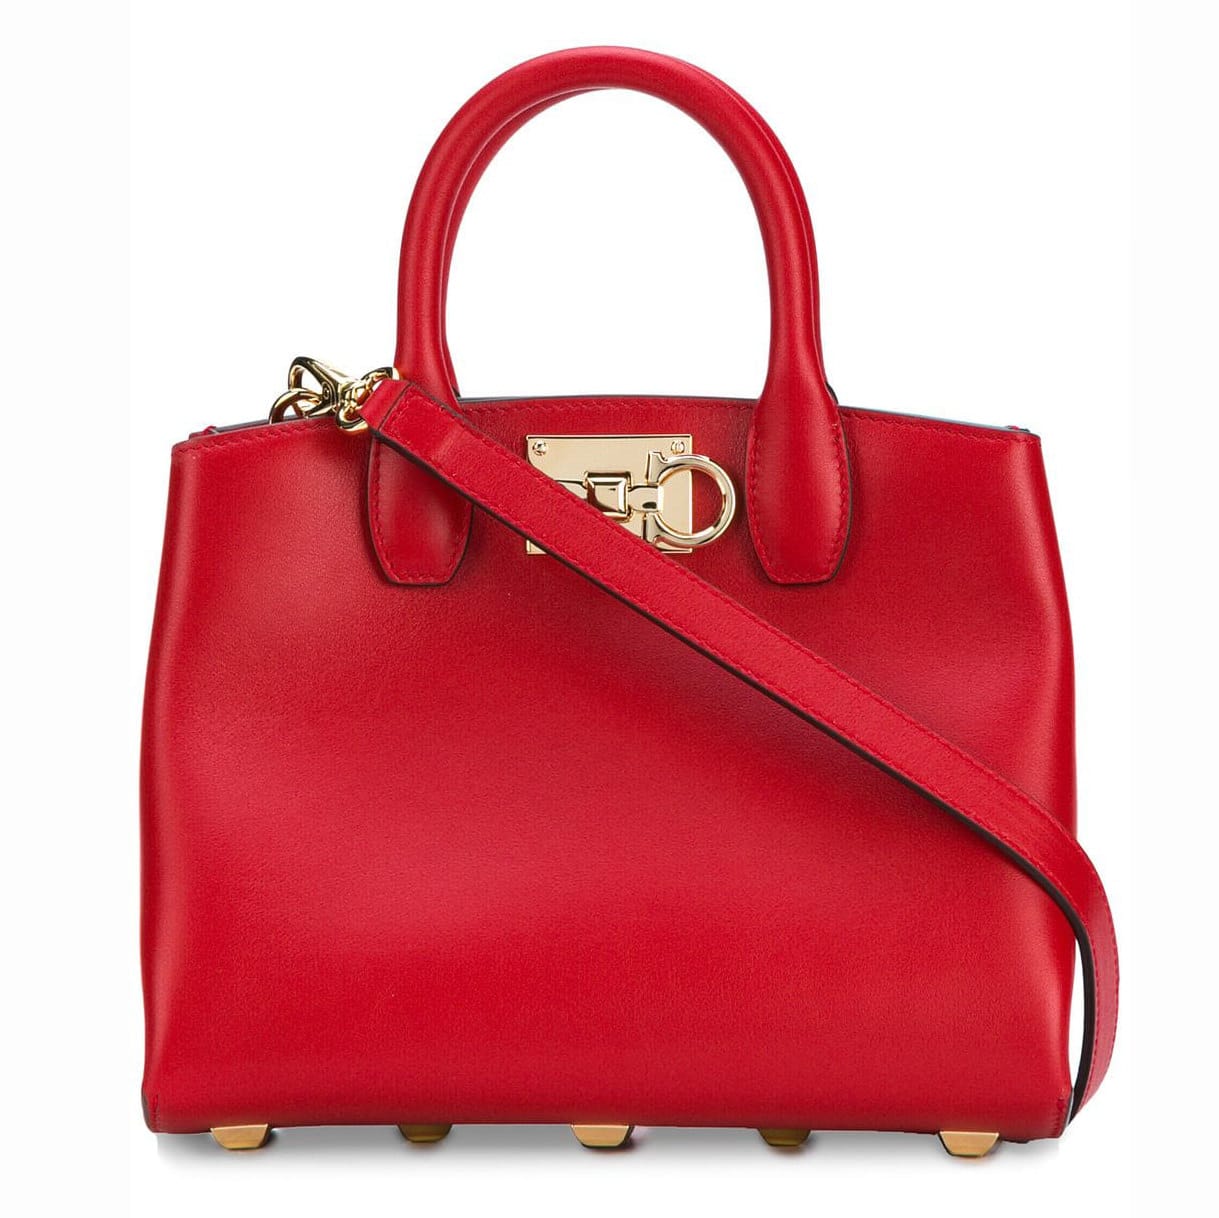 15 Red Hot Bags to Brighten Your Wardrobe—Fall 2018 Edition - PurseBlog